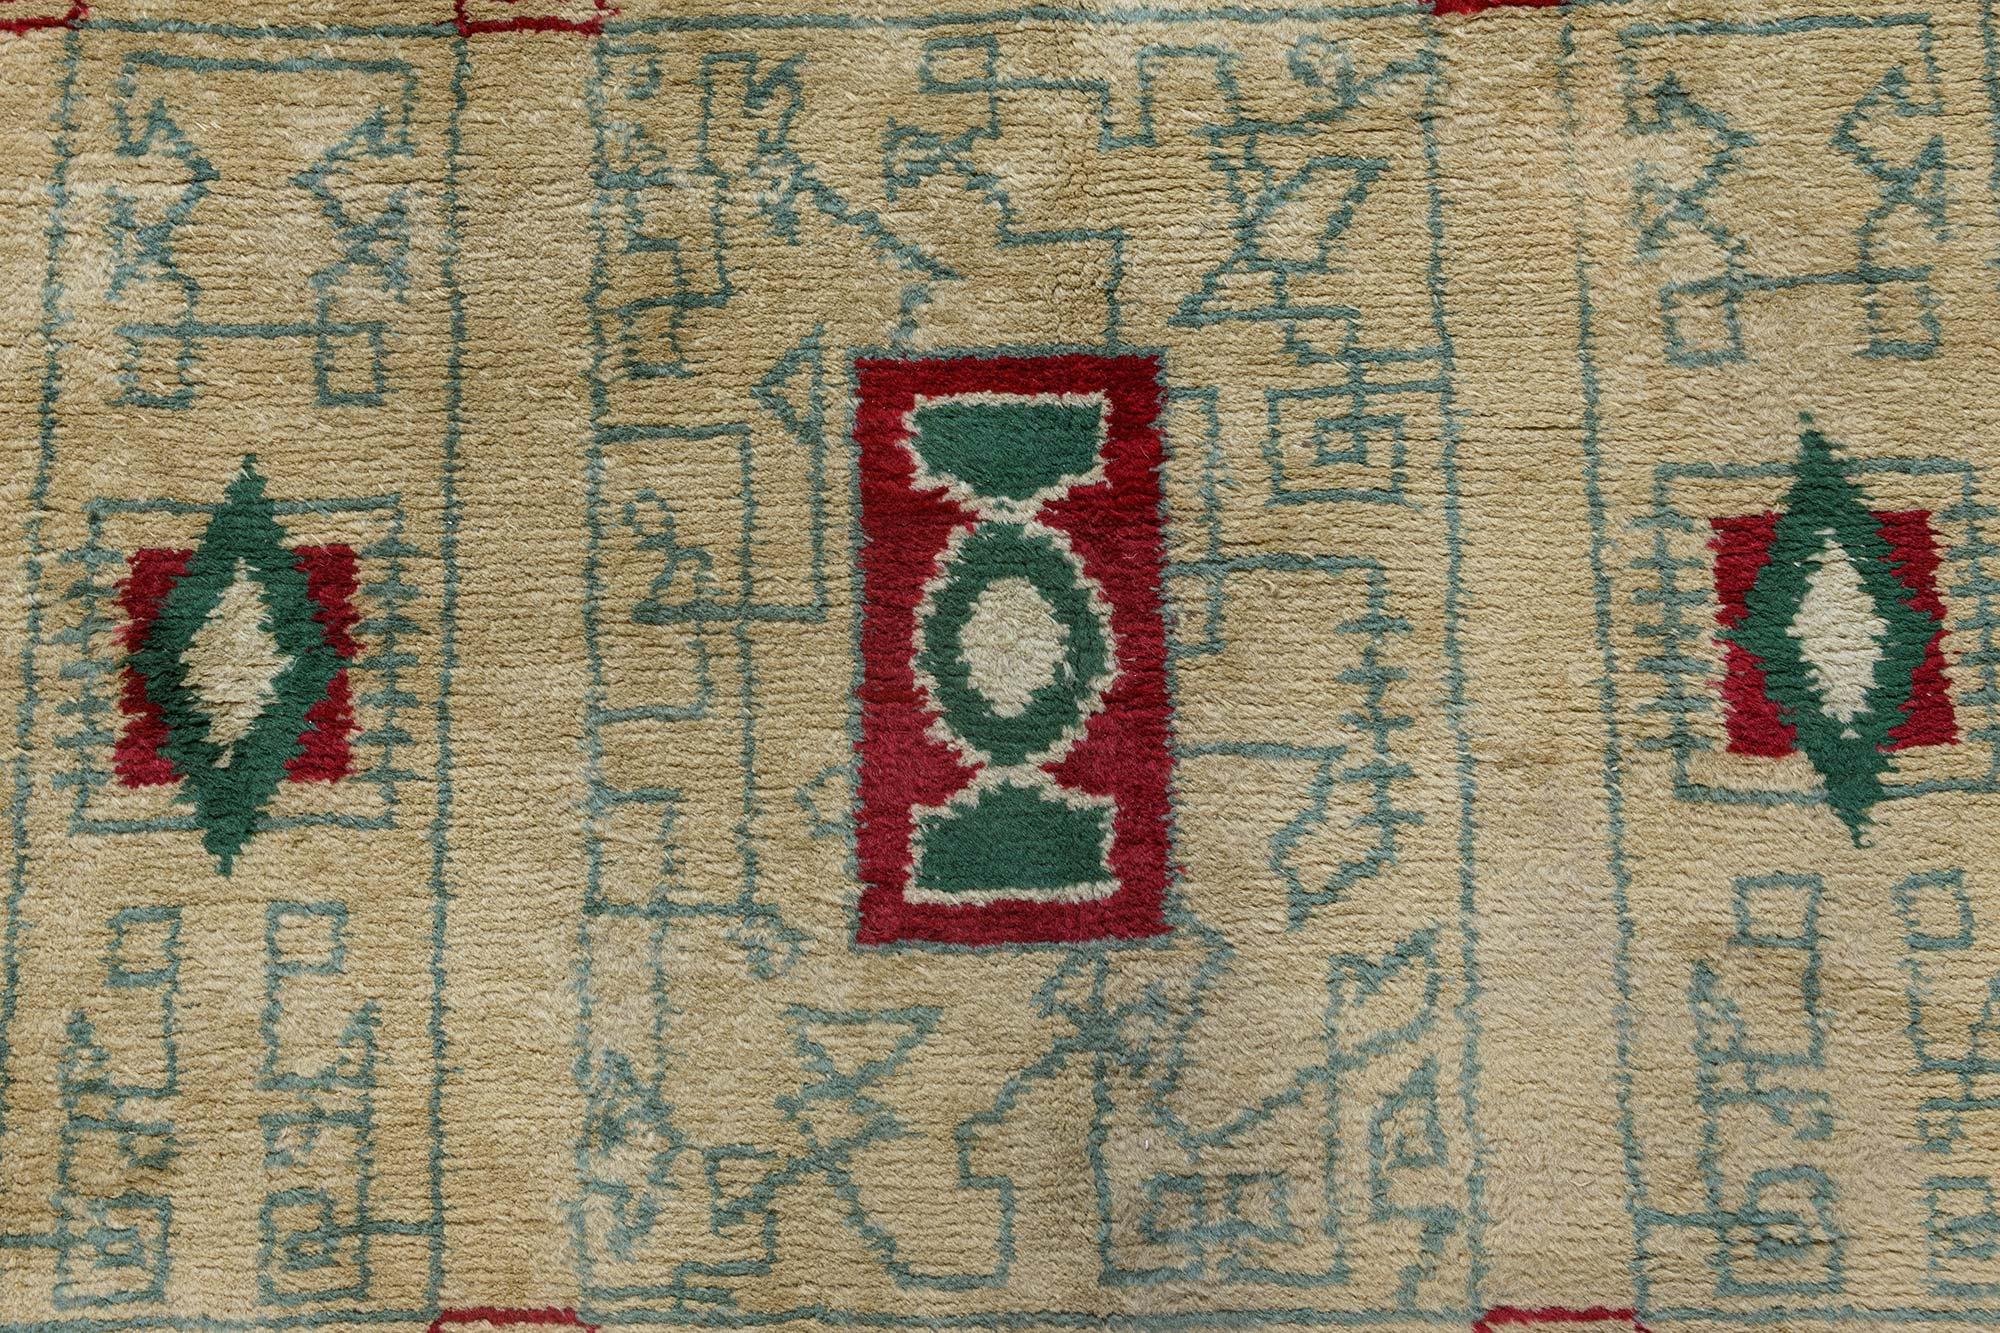 Art Deco Mid-20th century French Paule Leleu Beige, Green, Burgundy Hand Knotted Wool Rug